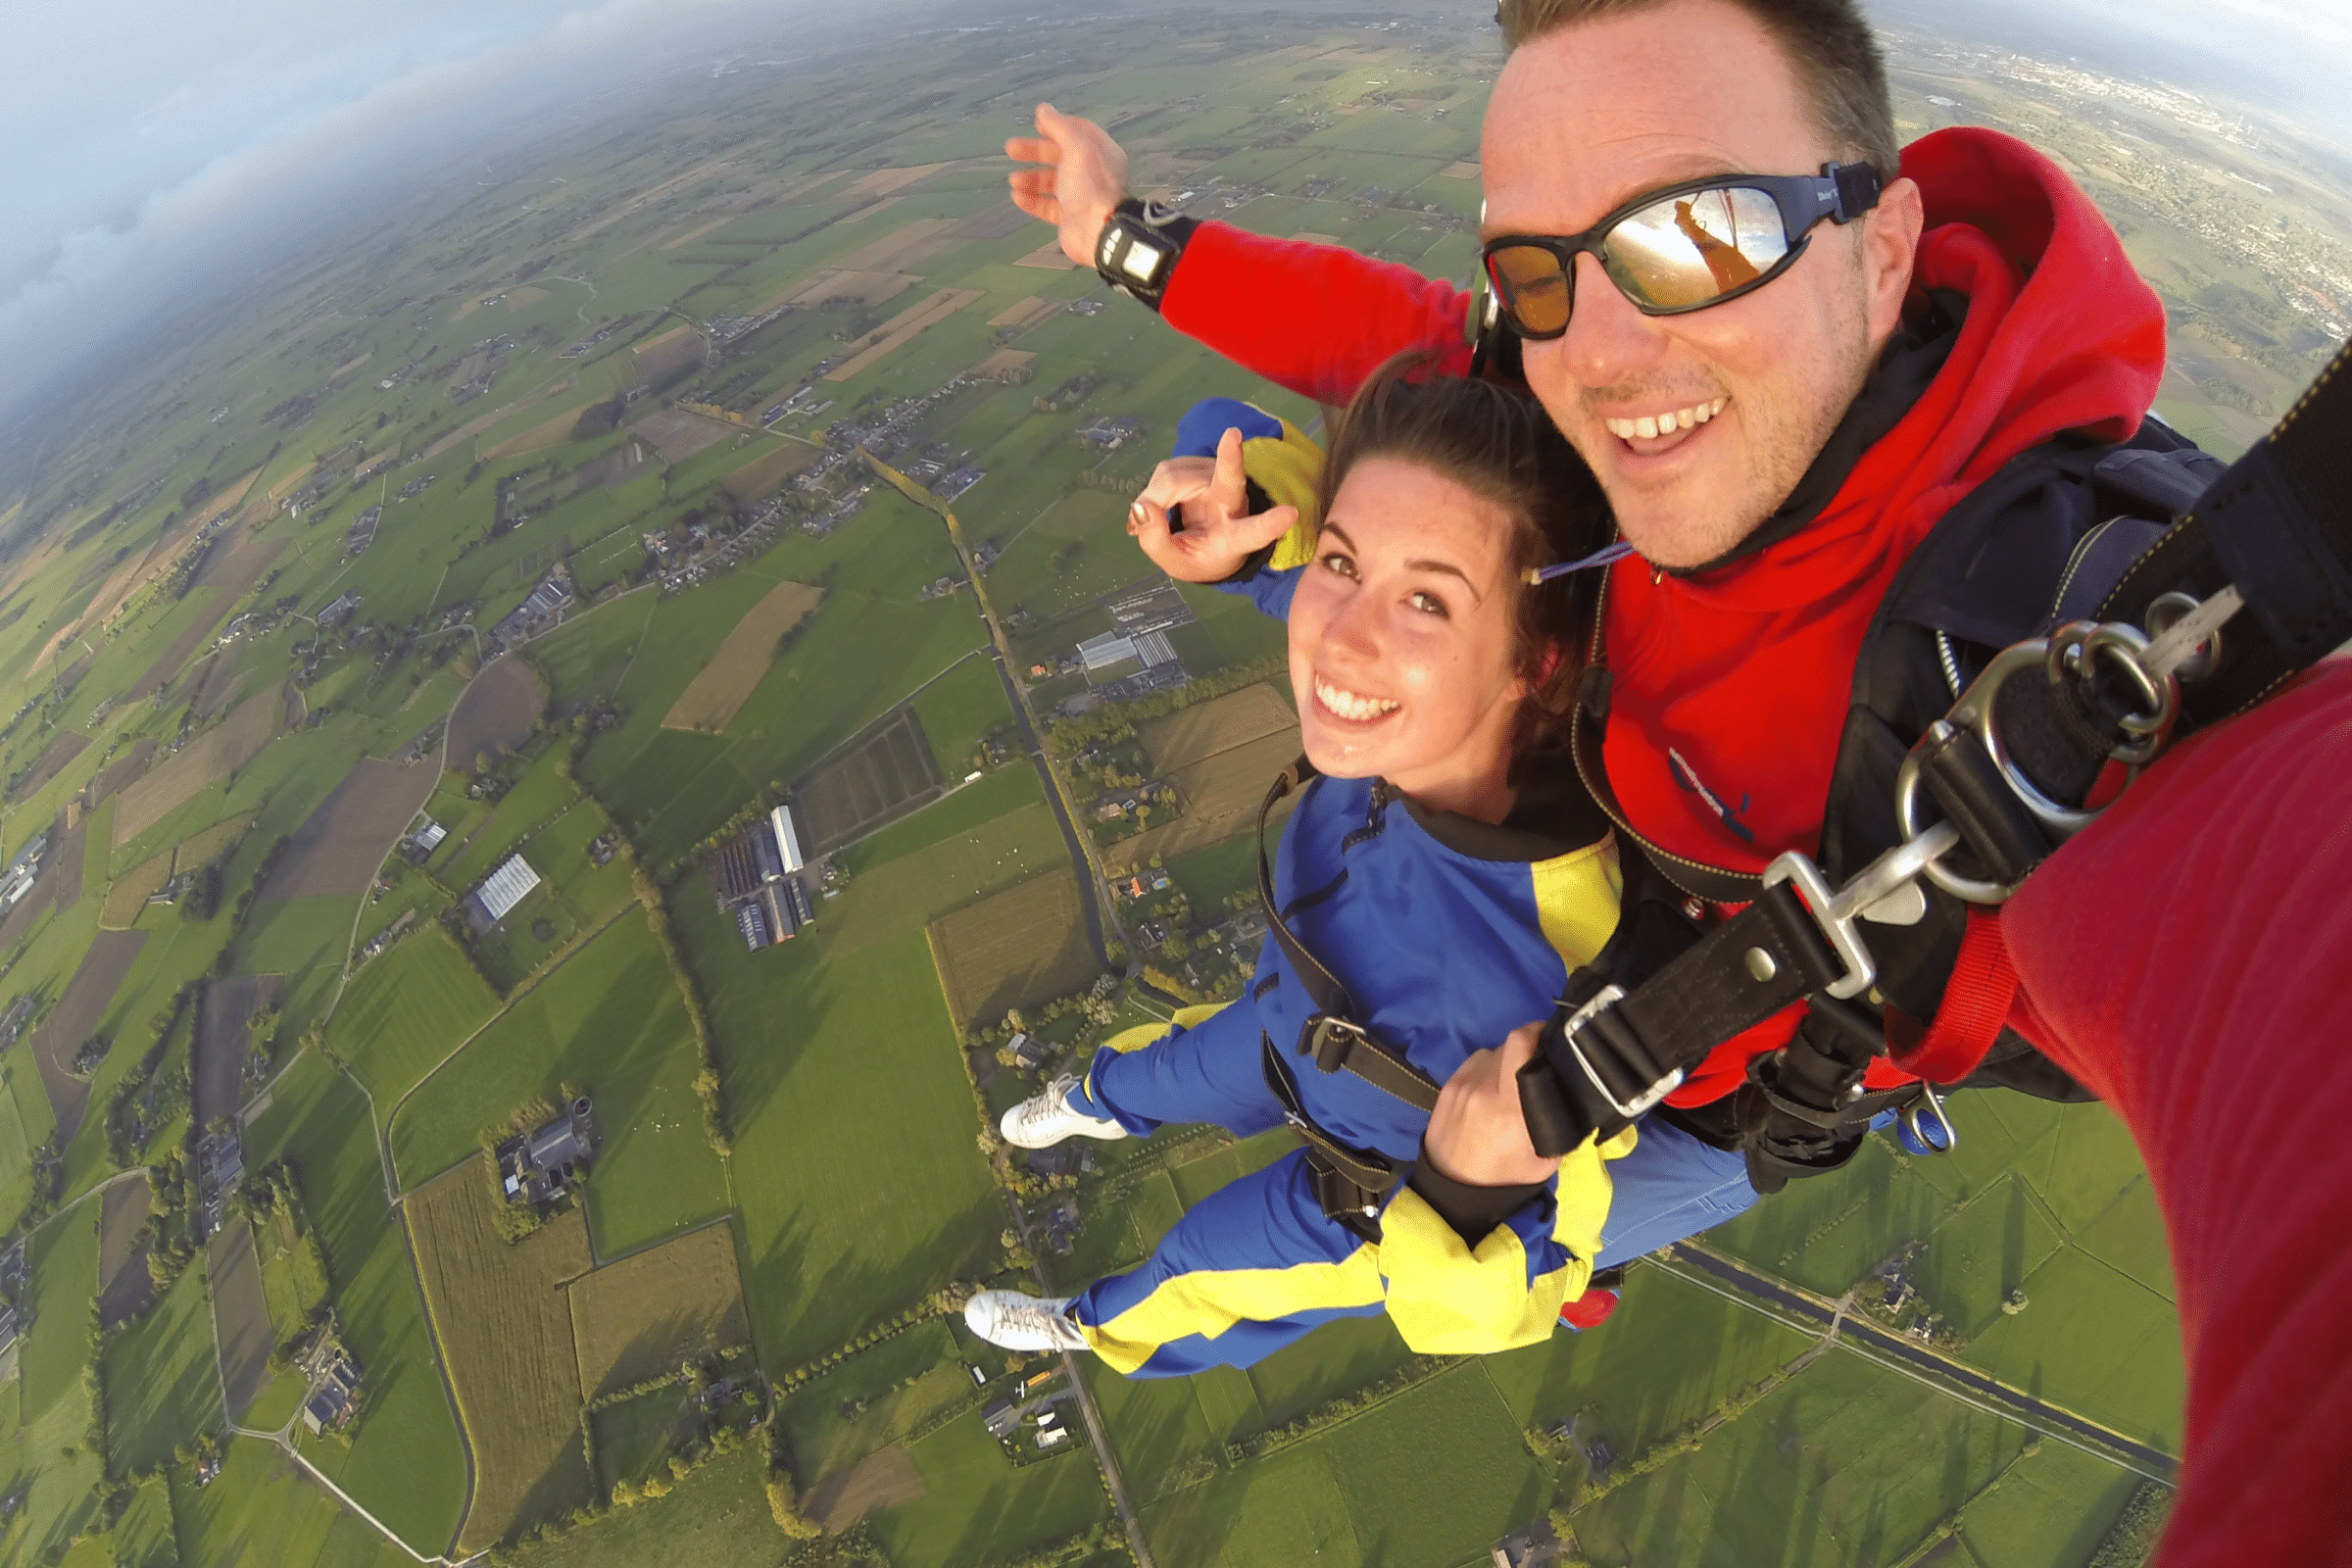 A white woman in her 30s and a white man in his 40s are doing a tandem skydive. They are high in the air above patchwork fields. They are both smiling.